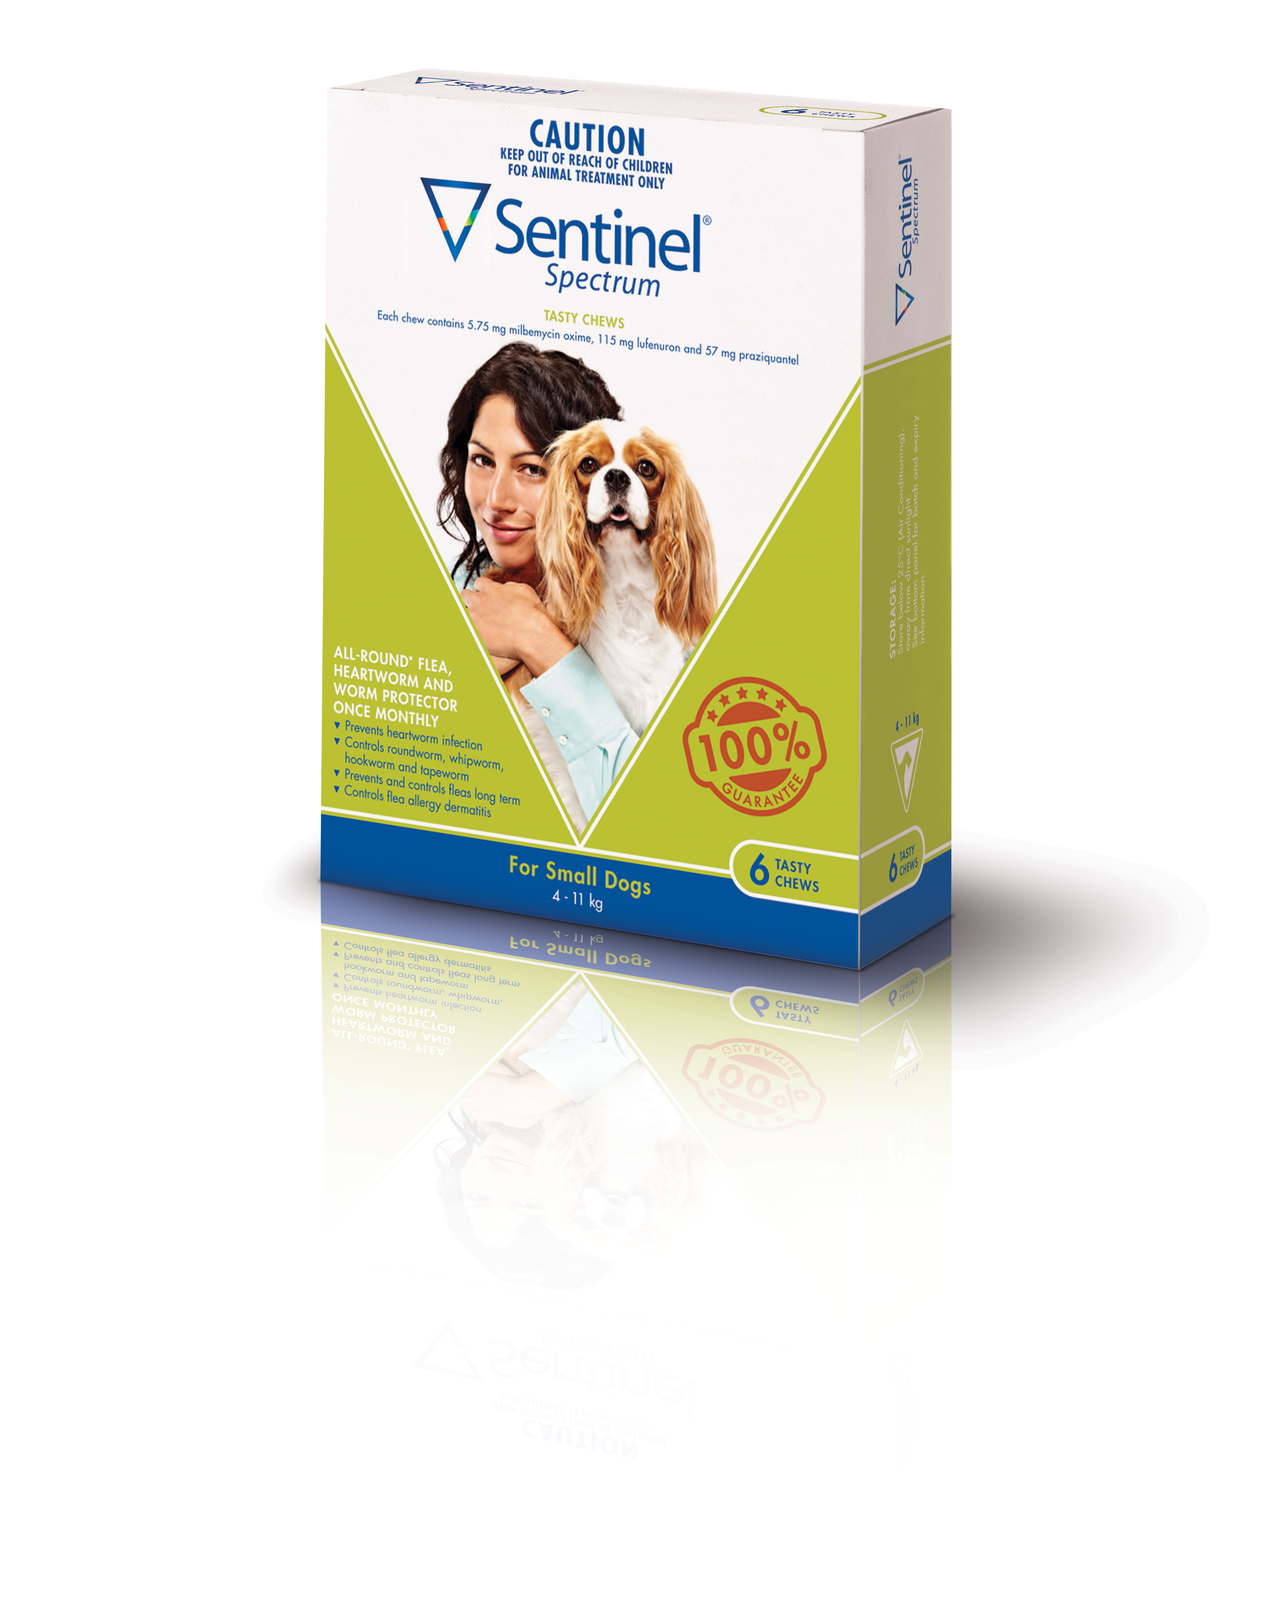 Pet Shop Direct - Sentinel Spectrum Chews for Dogs 4 to 11kg (Green) 6 Pack